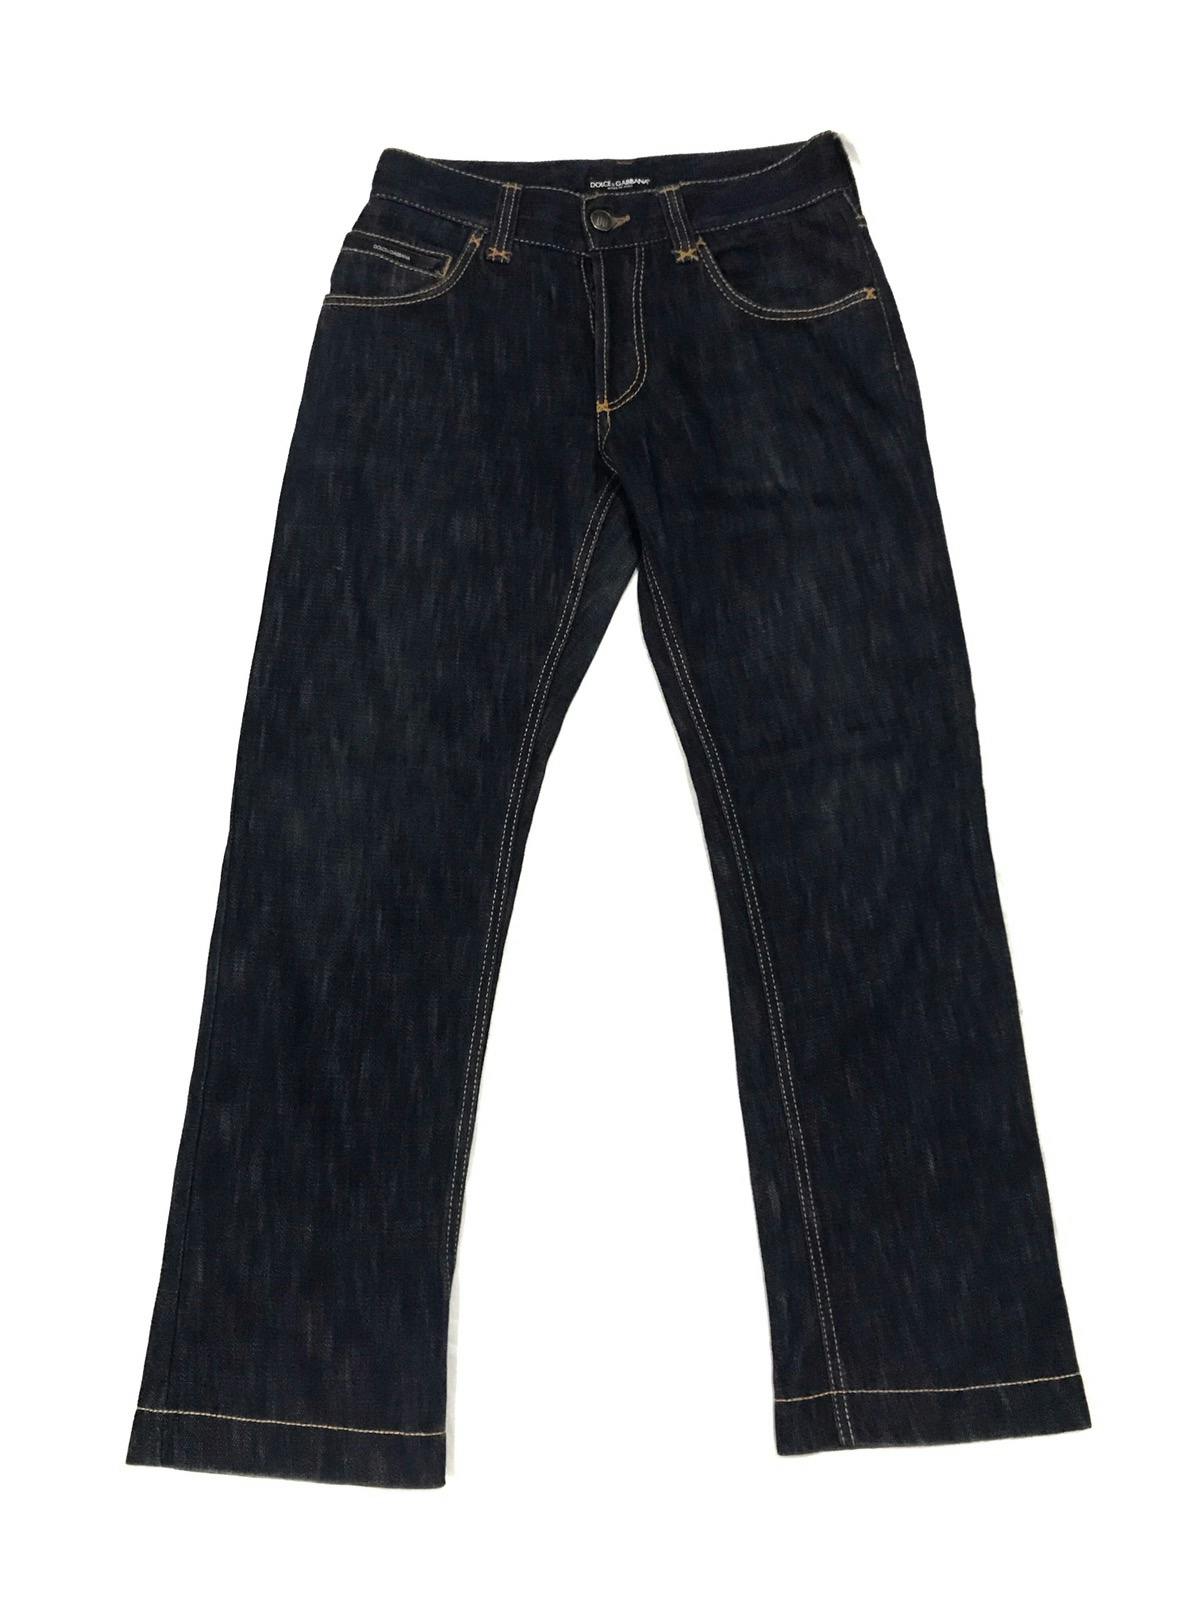 Dolce & Gabanna D&G 17 Loose Denim Jeans Made in Italy 🇮🇹 - 1